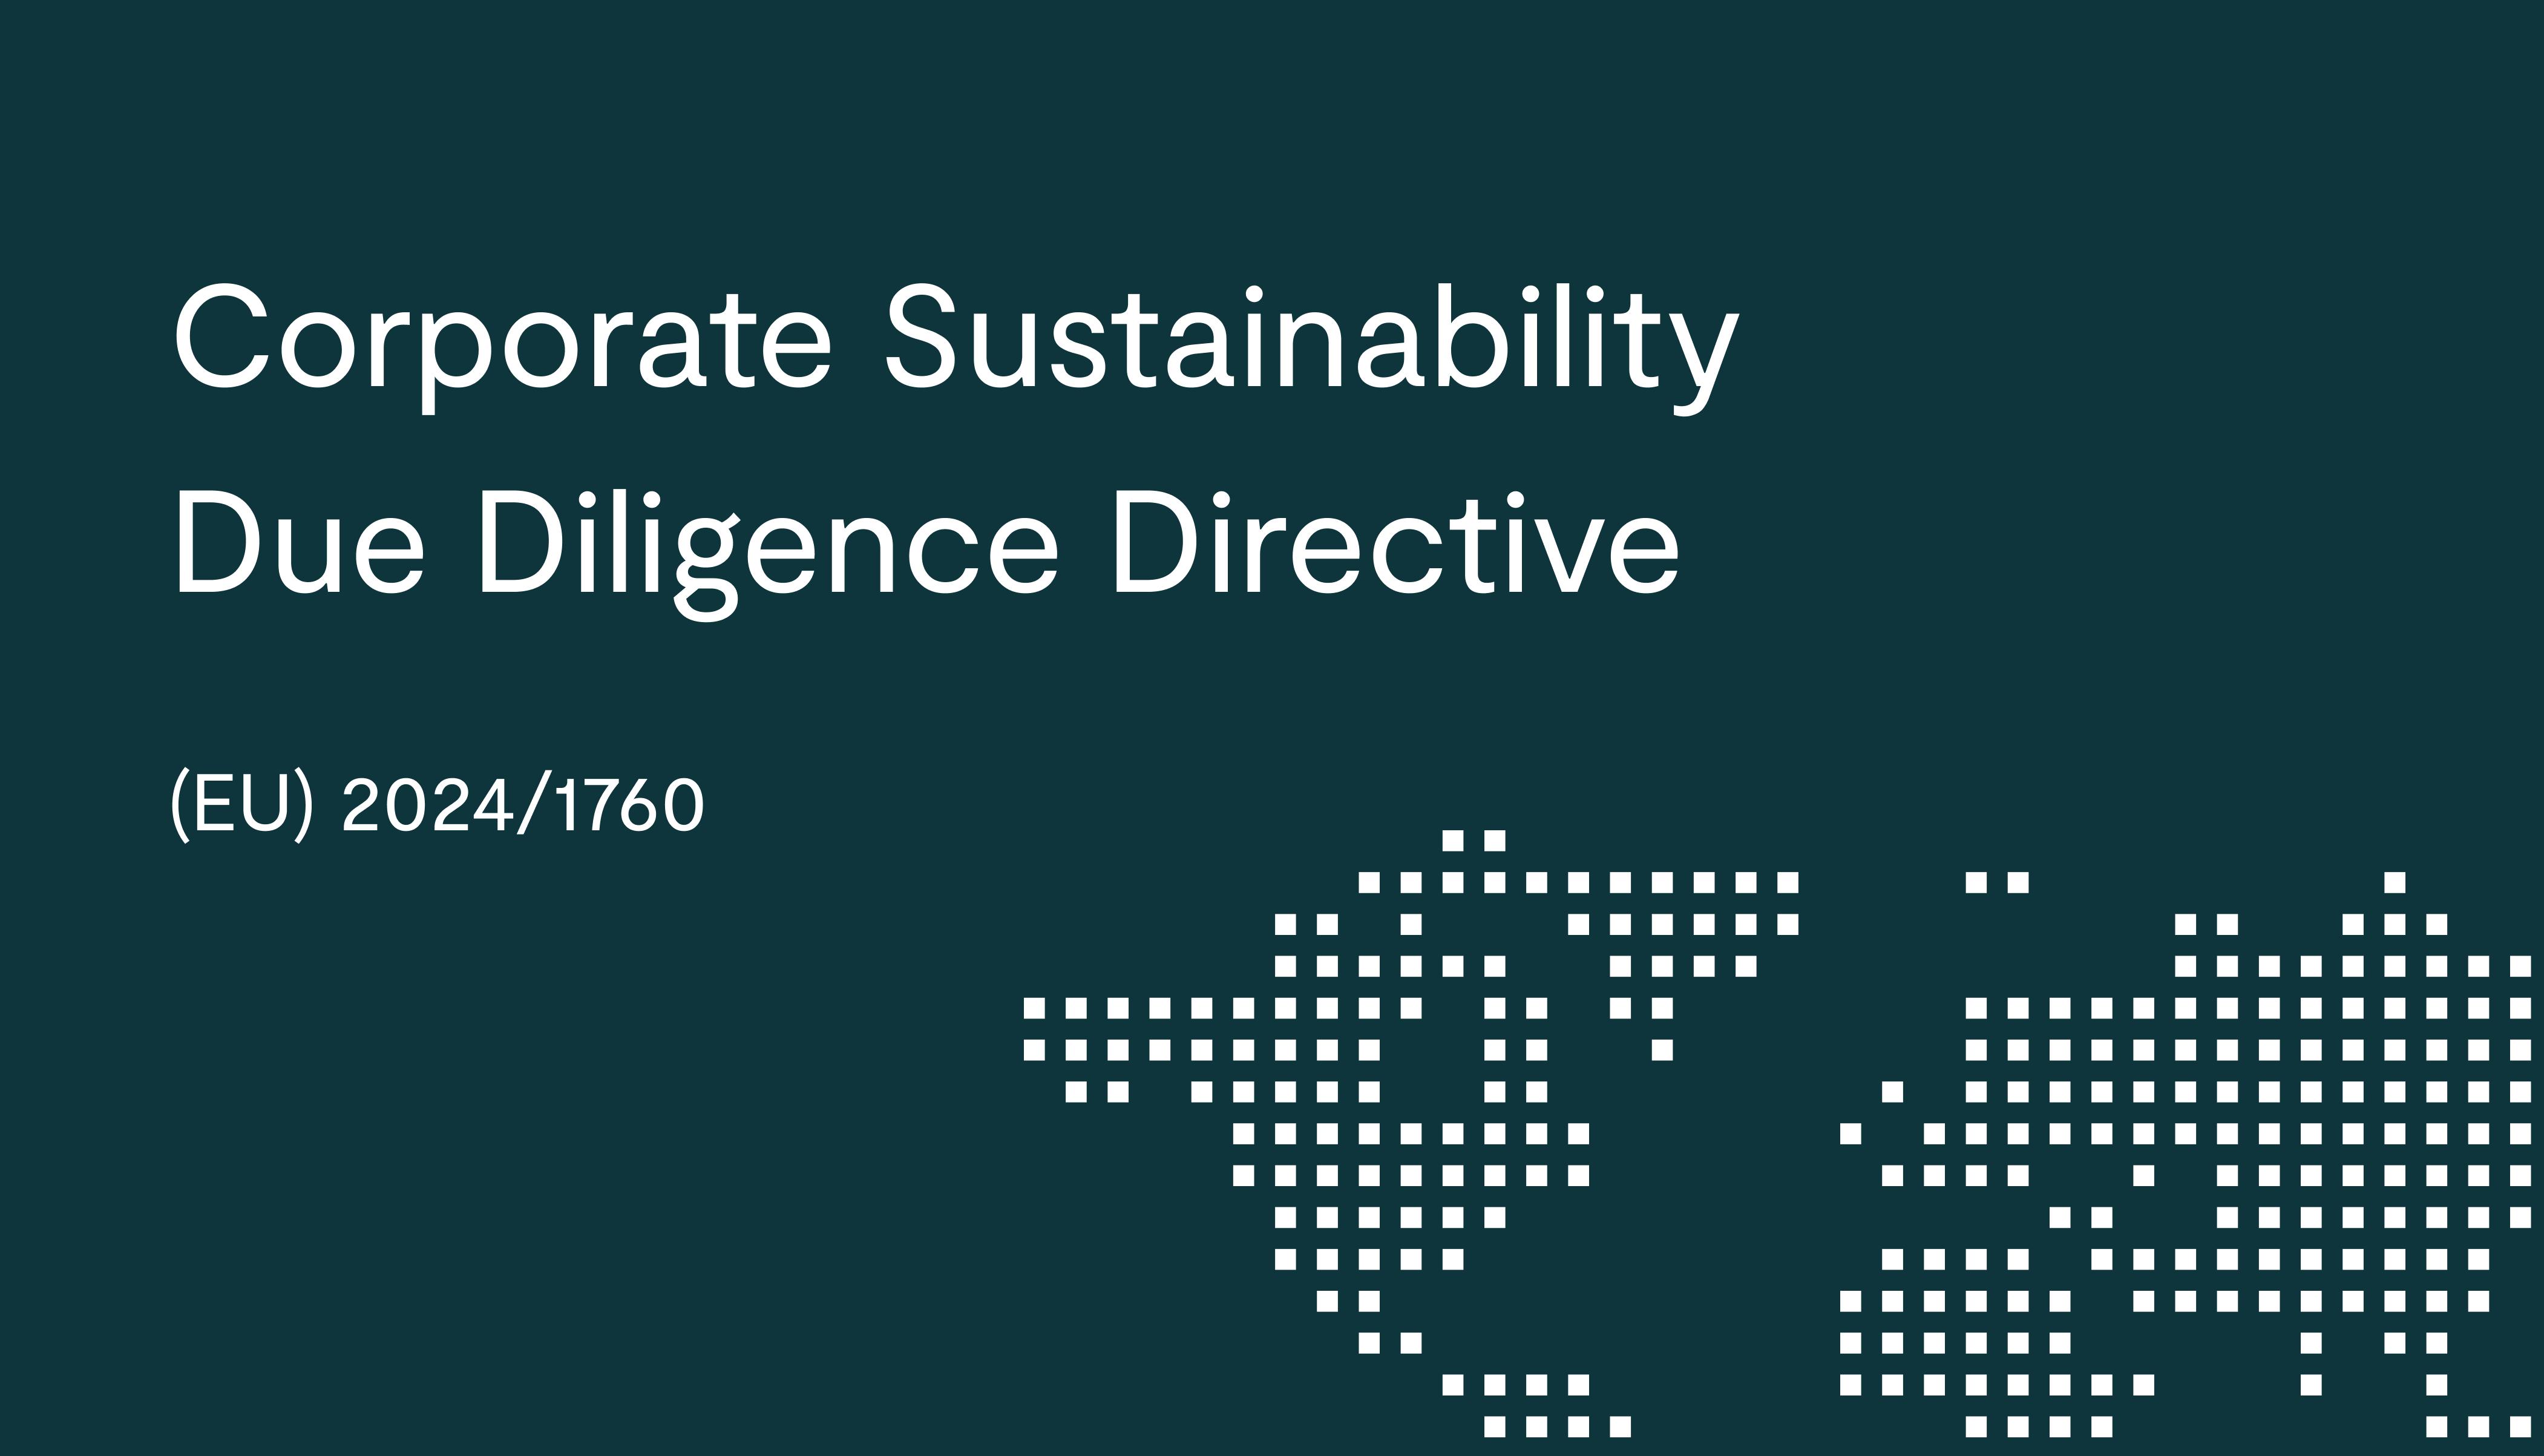 Corporate Sustainability Due Diligence Directive ((EU) 2024/1760)